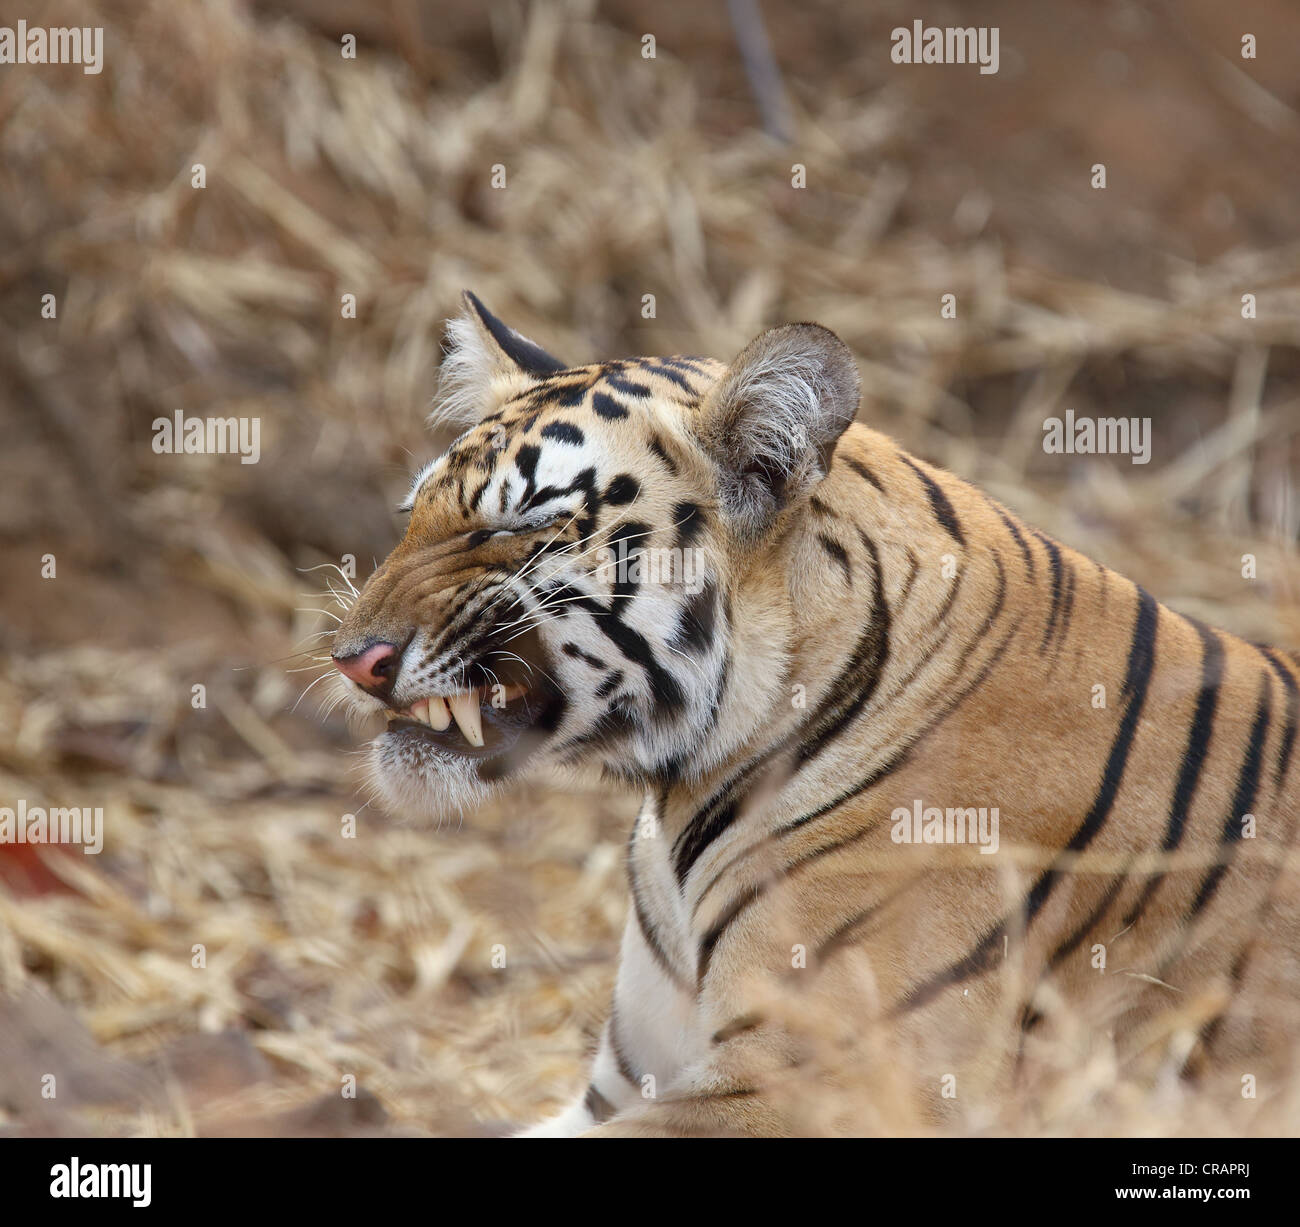 different moods of a young tiger. Stock Photo